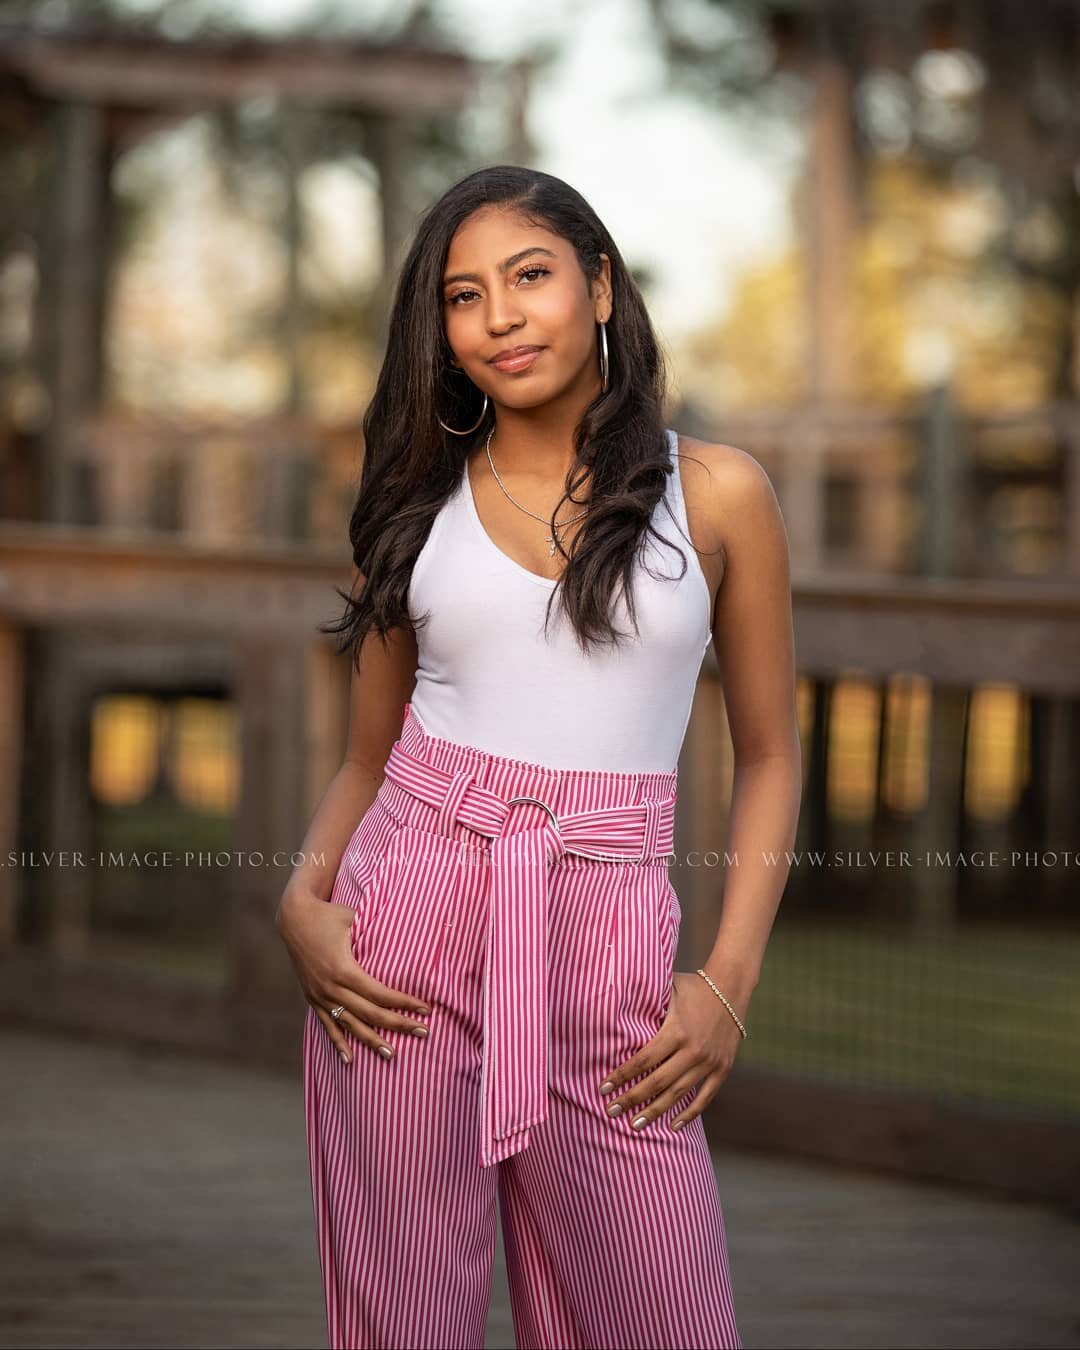 We took these gorgeous senior images of Anisah before Spring Break and all the craziness started!
.
.
#thewoodlands #thetwelthyear #houstonphotographer #graduation #texasphotographer #silverimagephotography #seniors #seniorphotos #seniorpics #highsch